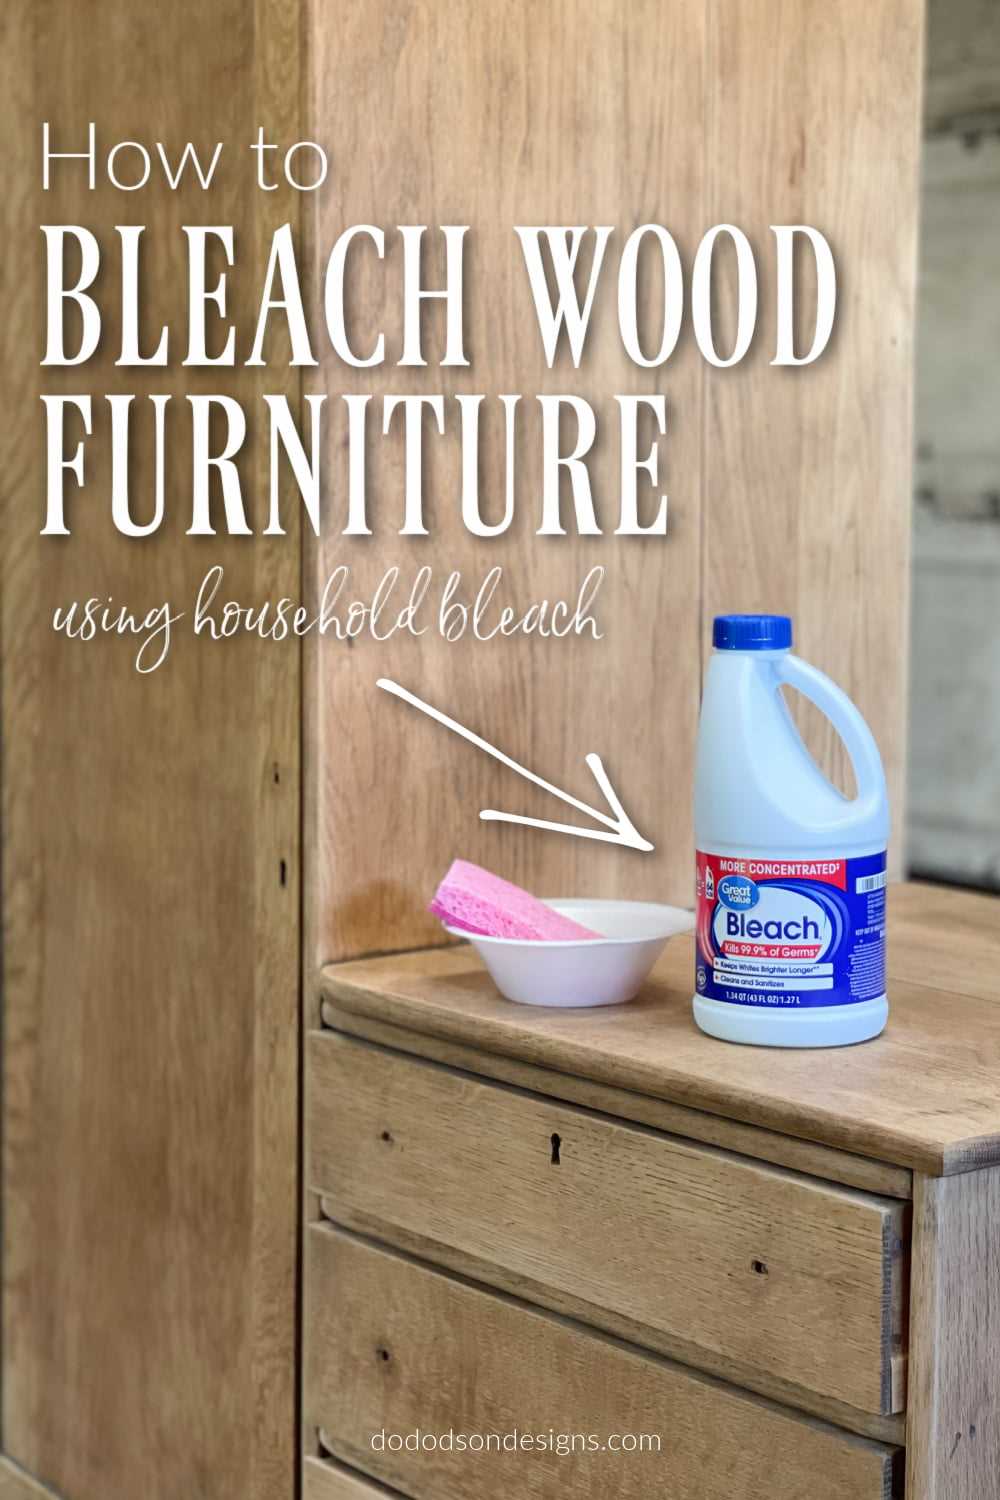 Can You Use Bleach on Wood?